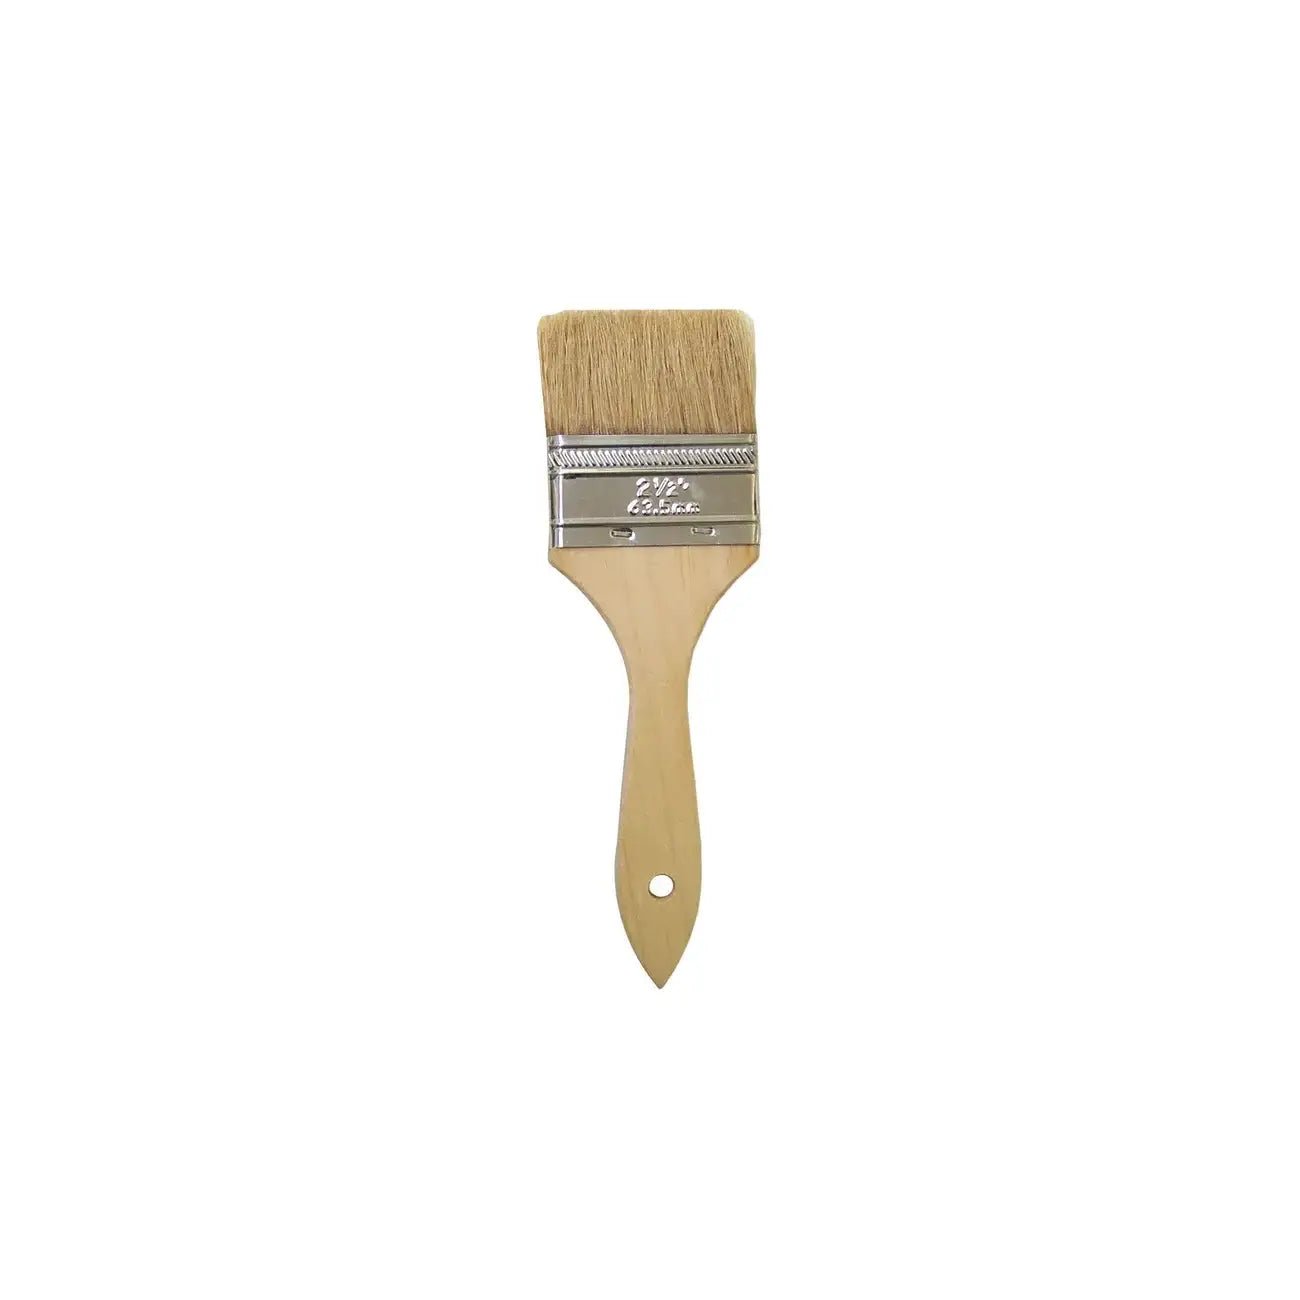 Chip Brushes - Rossi Paint Stores - Single Thick - 2.5"